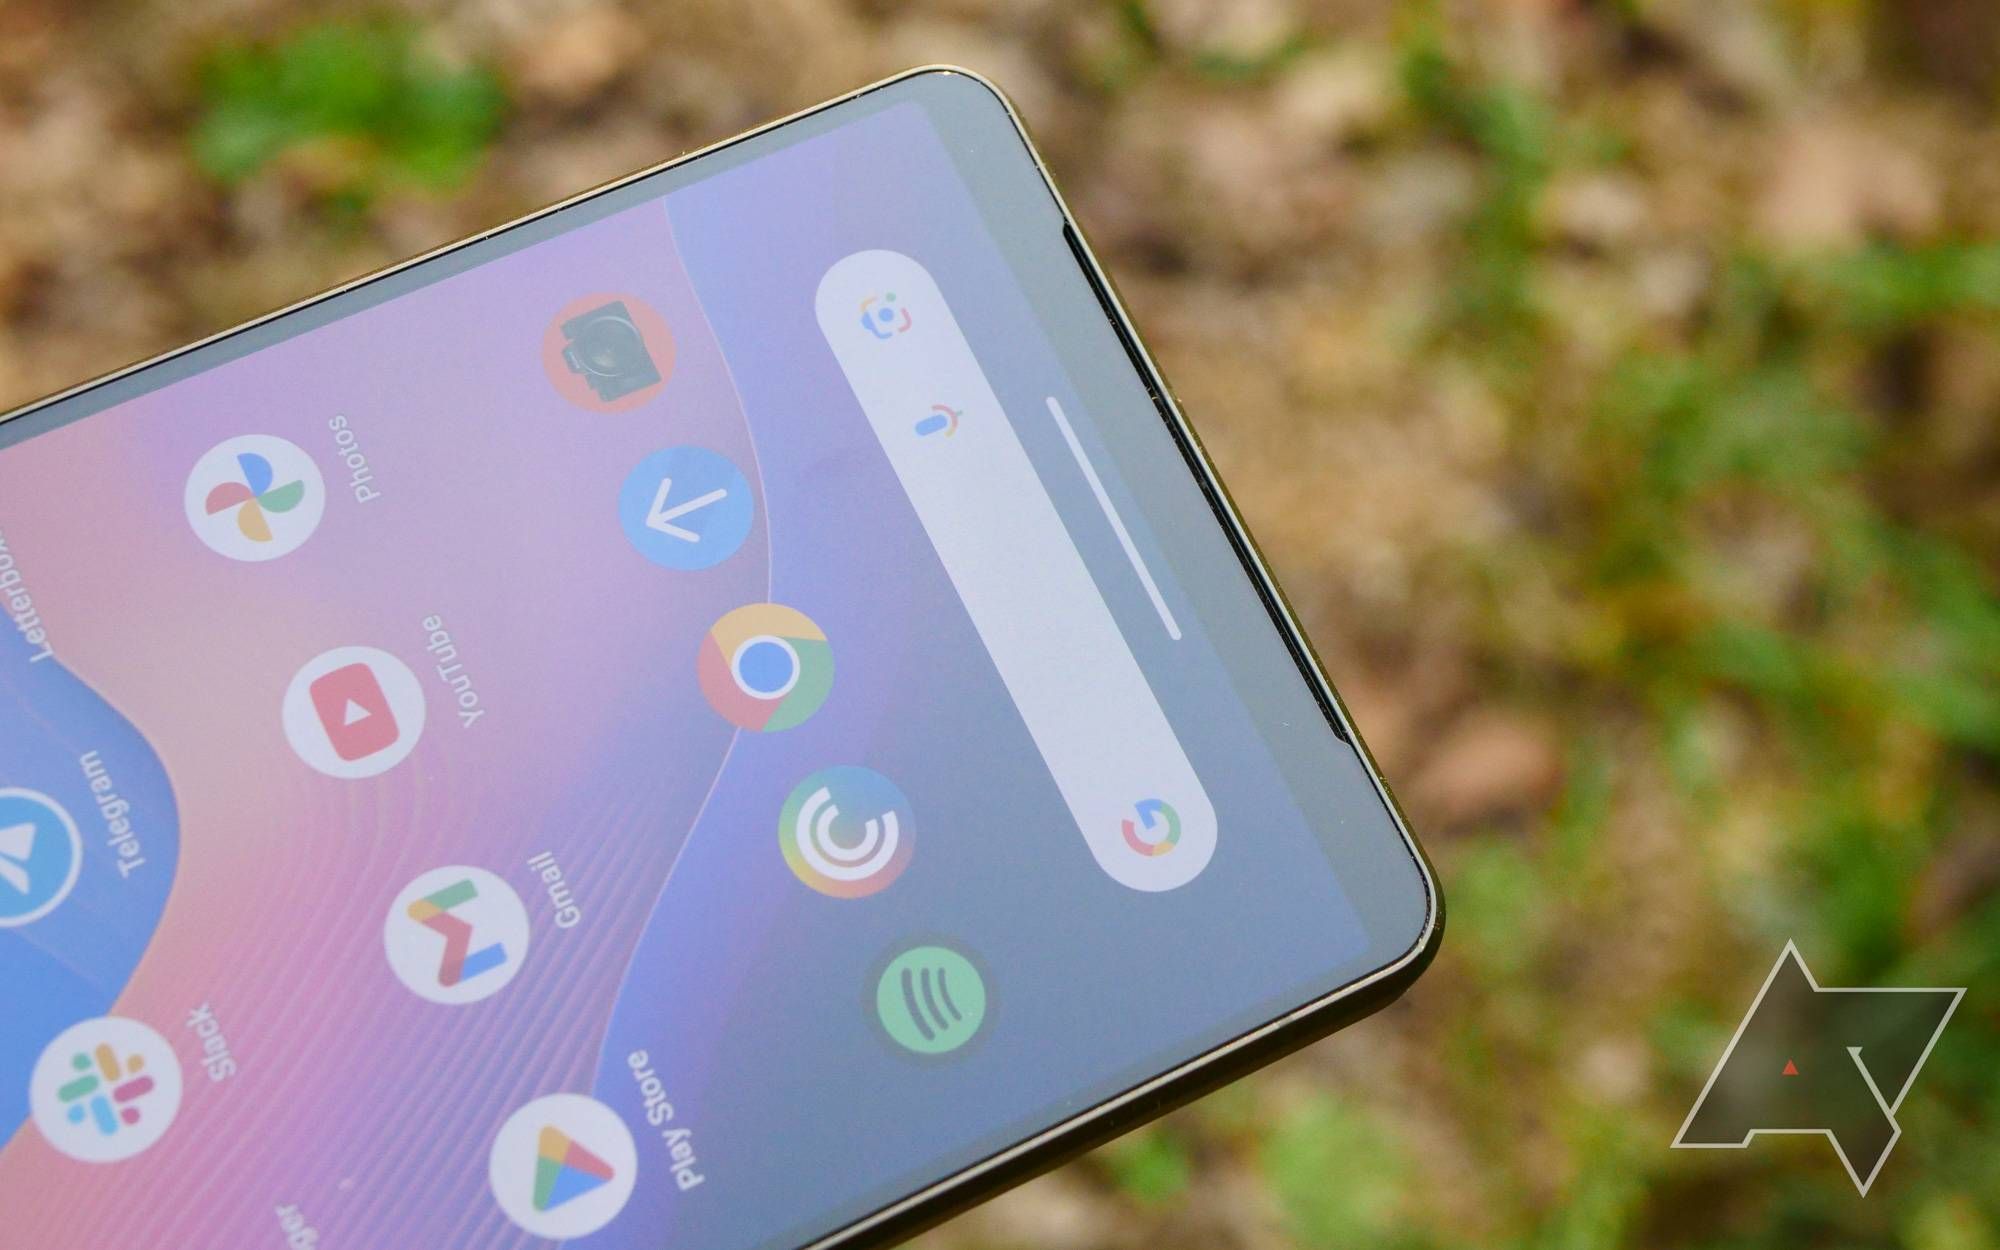 Sony Xperia 1 V review - Premium smartphone with unrivaled equipment and  Zeiss cameras -  Reviews